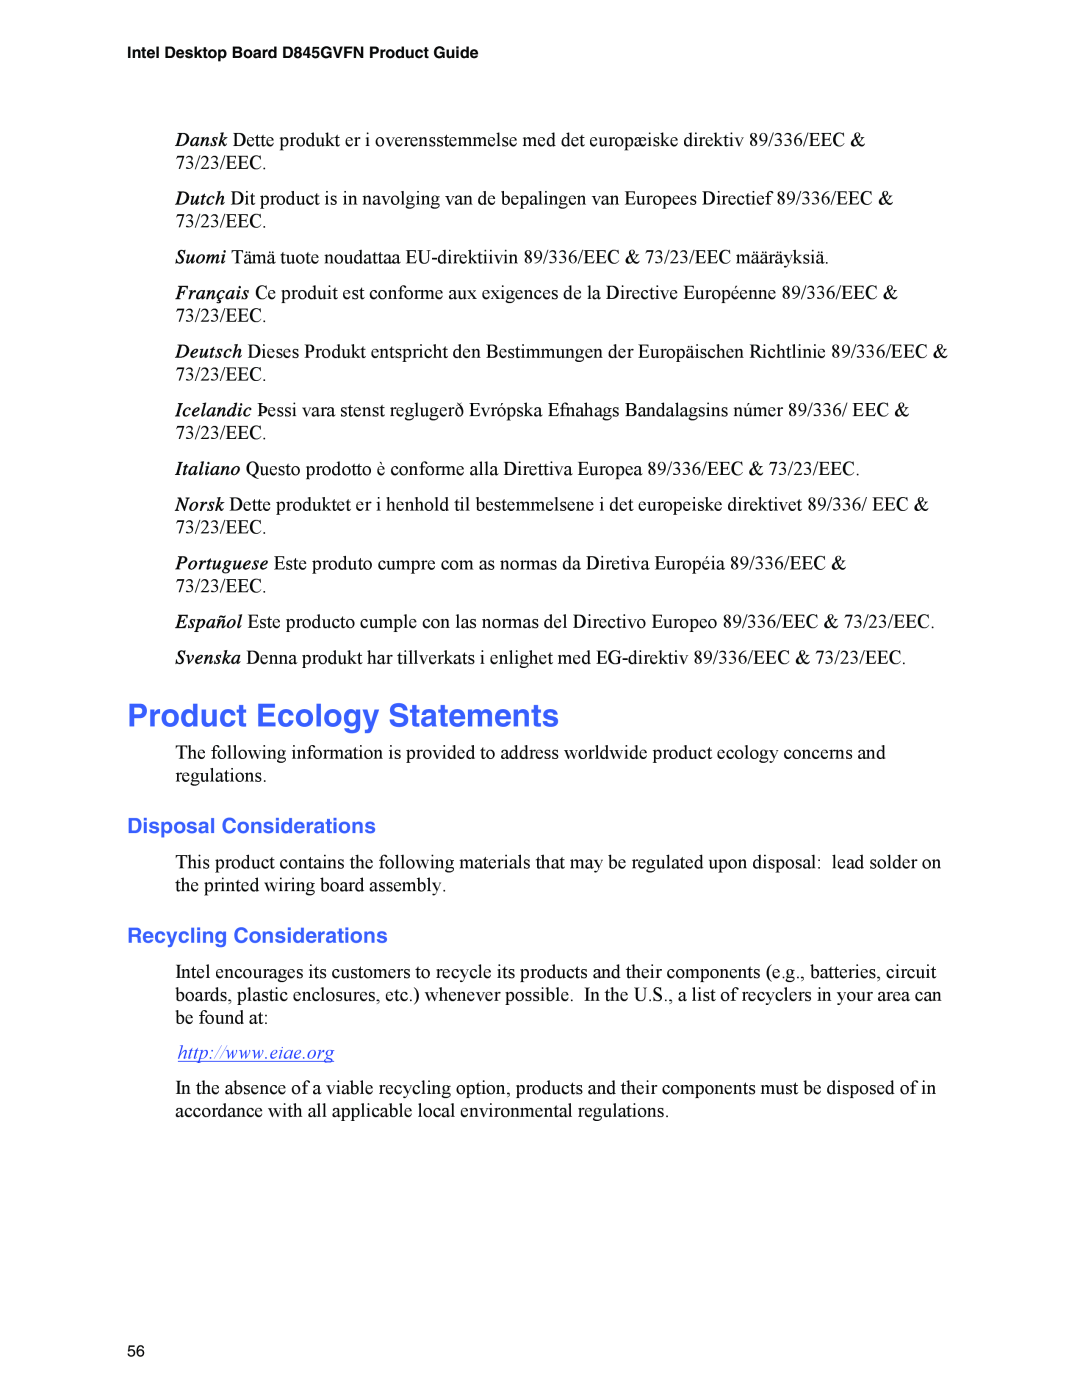 Intel D845GVFN manual Product Ecology Statements, Disposal Considerations, Recycling Considerations 